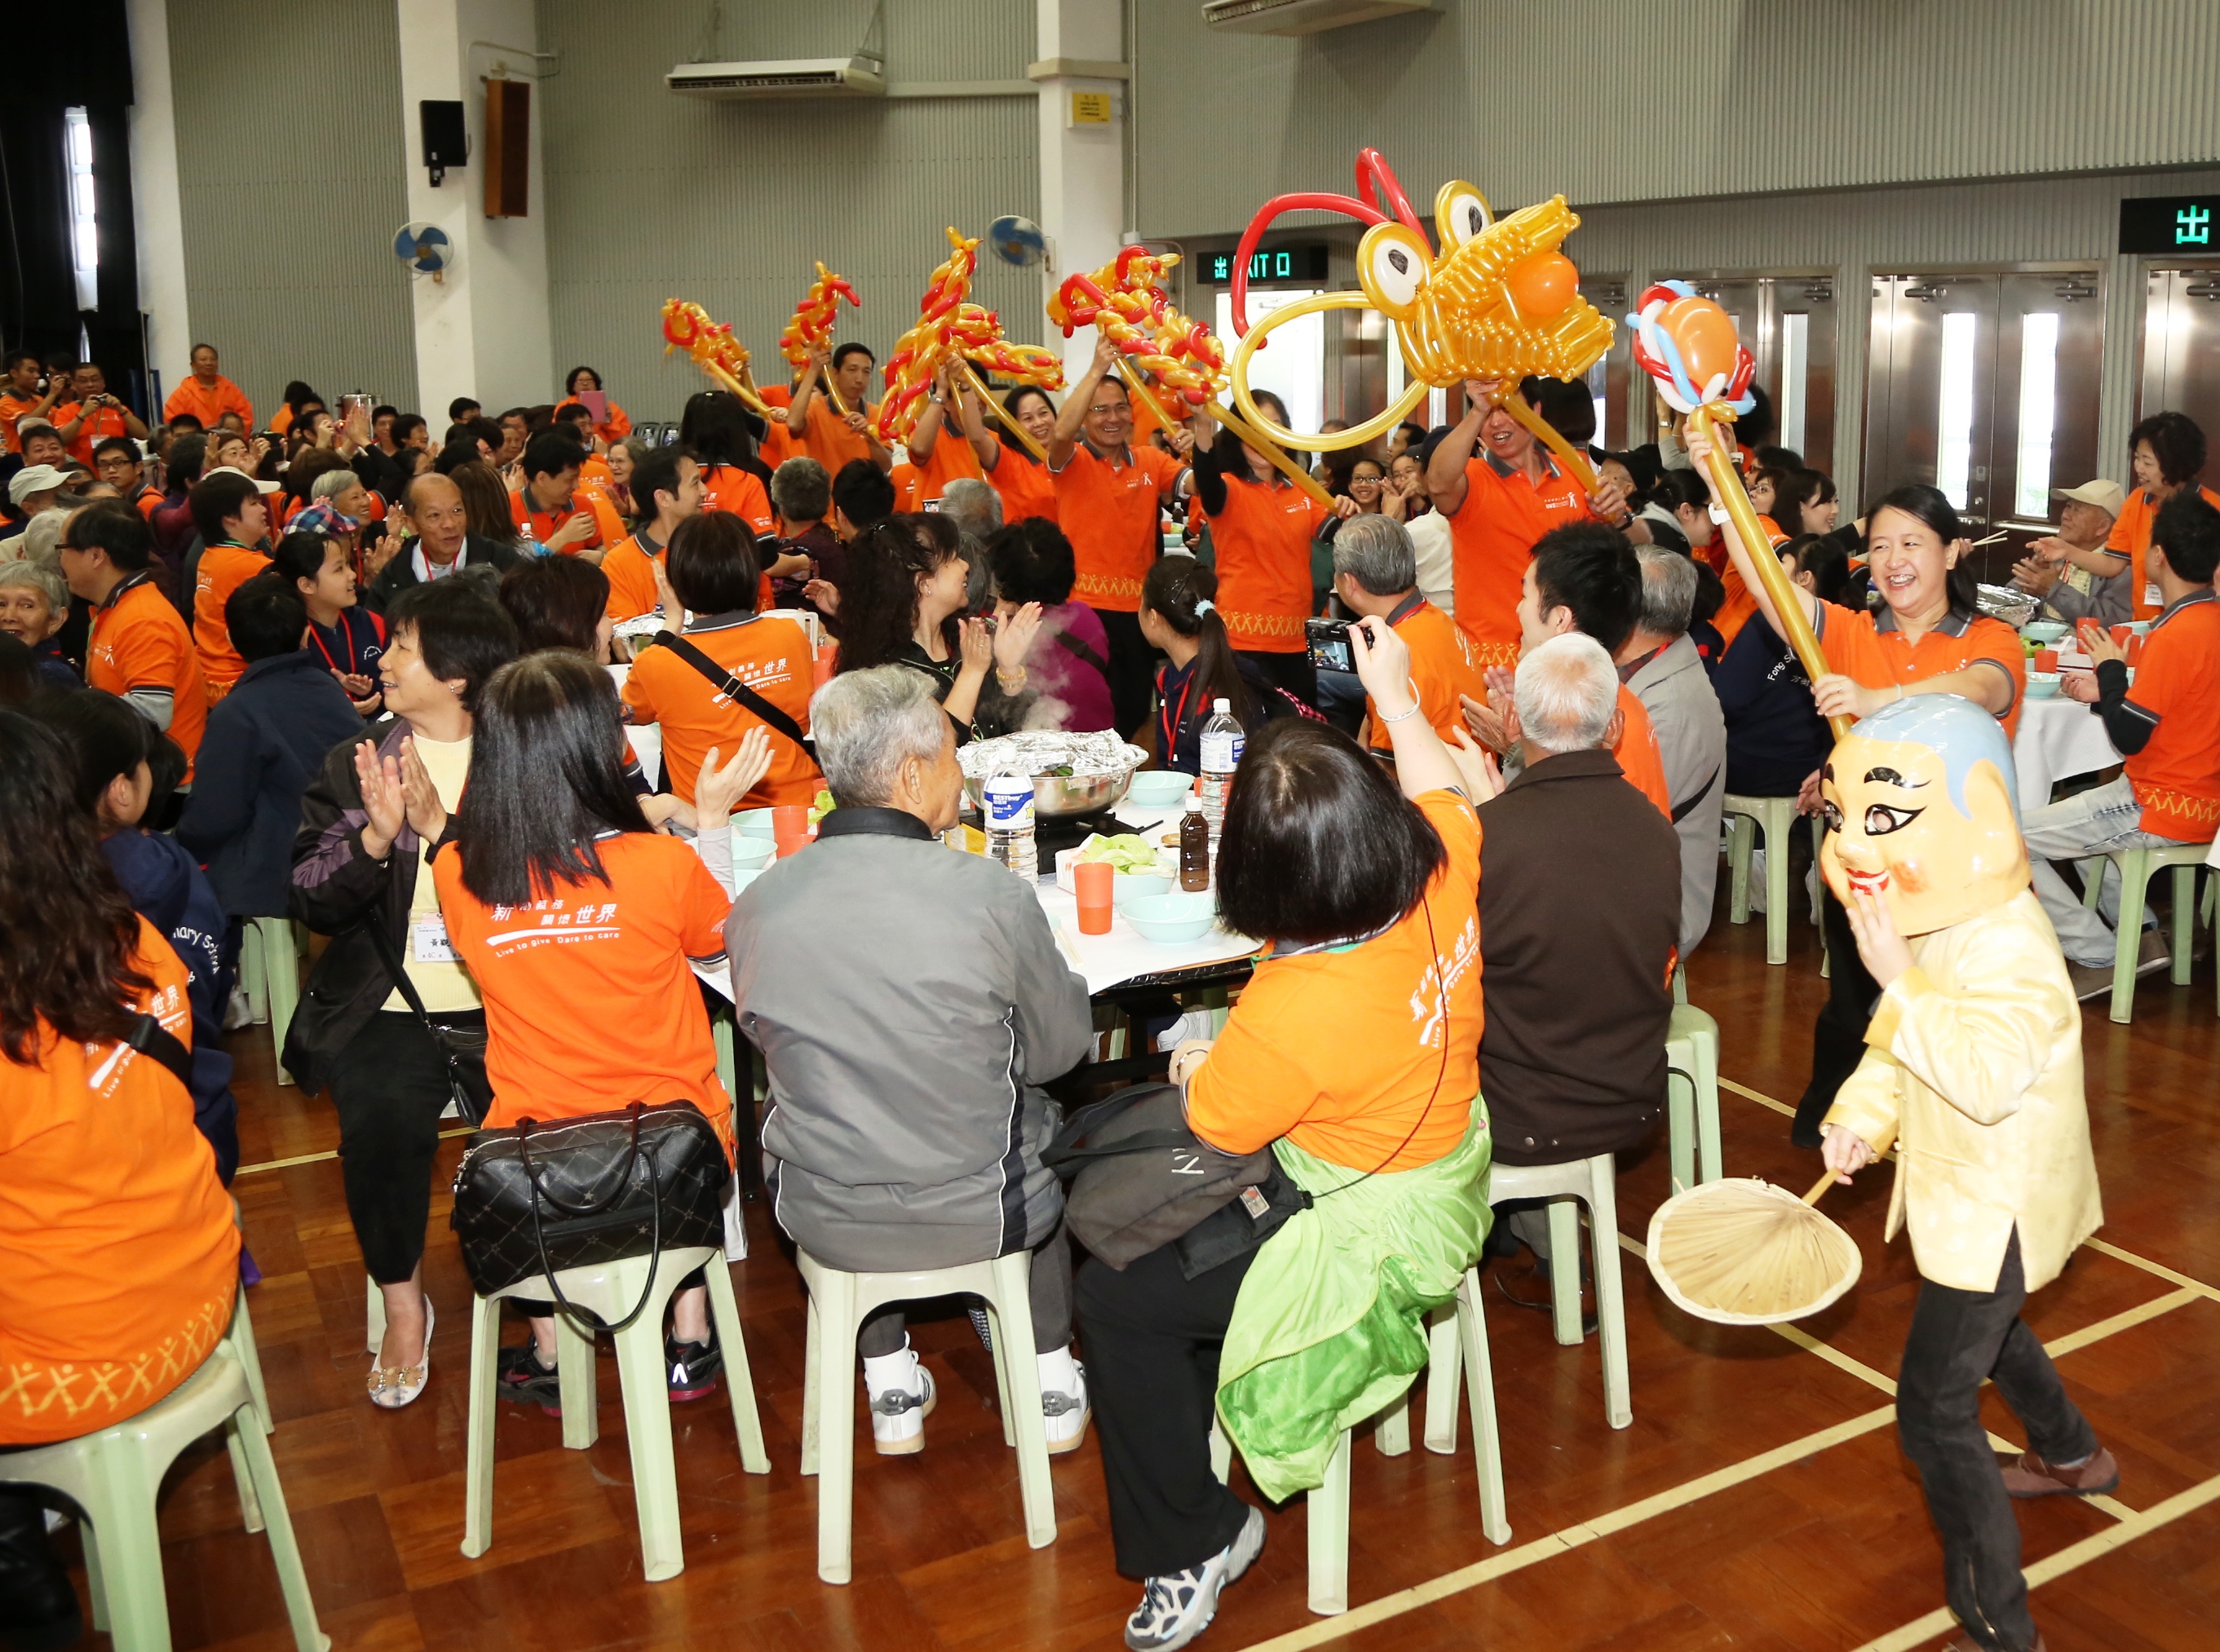 NWS Holdings Launches Elderly Services Programme in Partnership with HKYWCA to Celebrate 10th Anniversary of its Listing